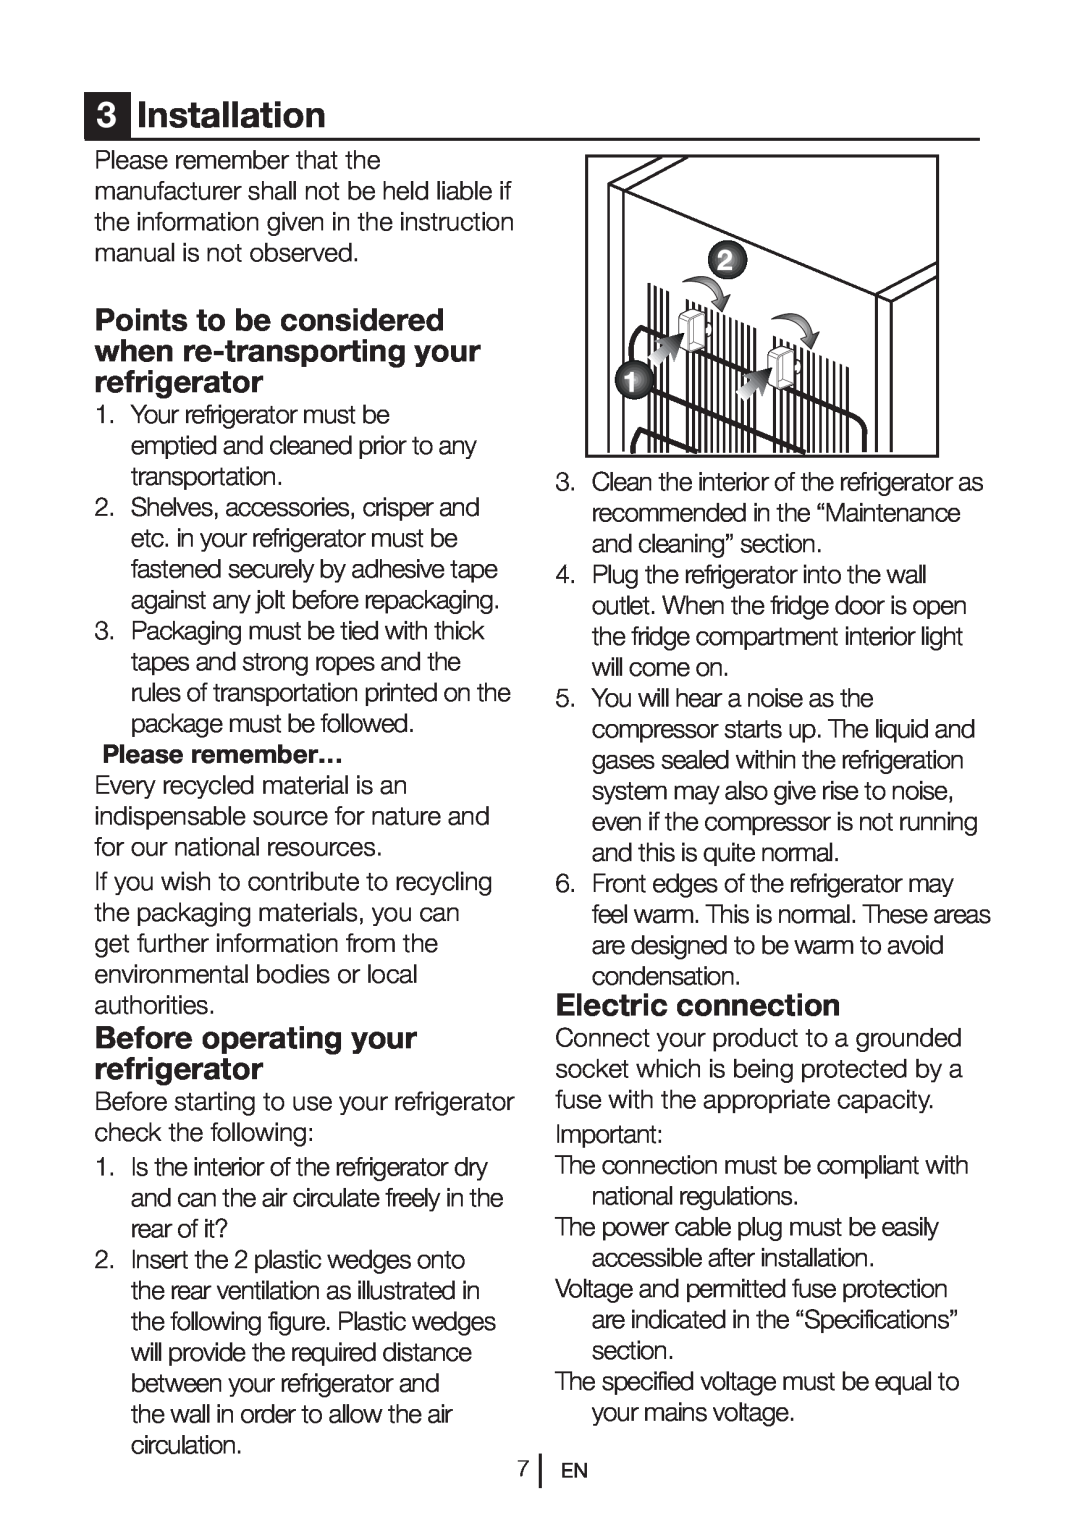 Beko DN 133020 manual Installation, Points to be considered when re-transporting your refrigerator, Electric connection 